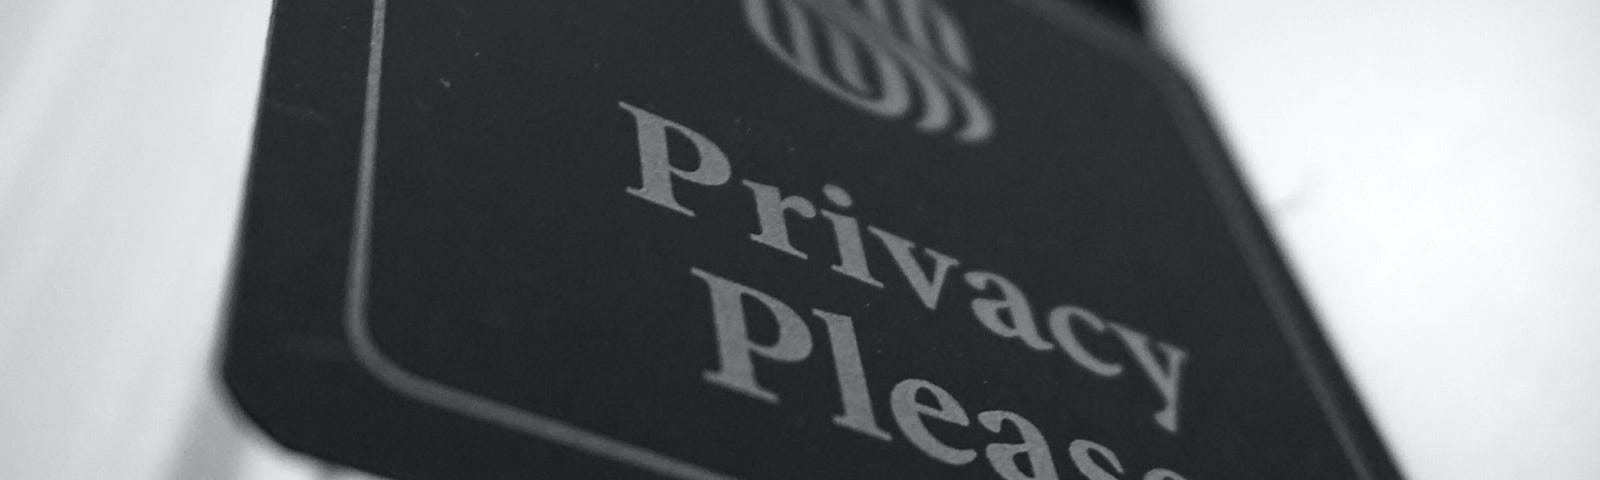 sign saying “privacy please”